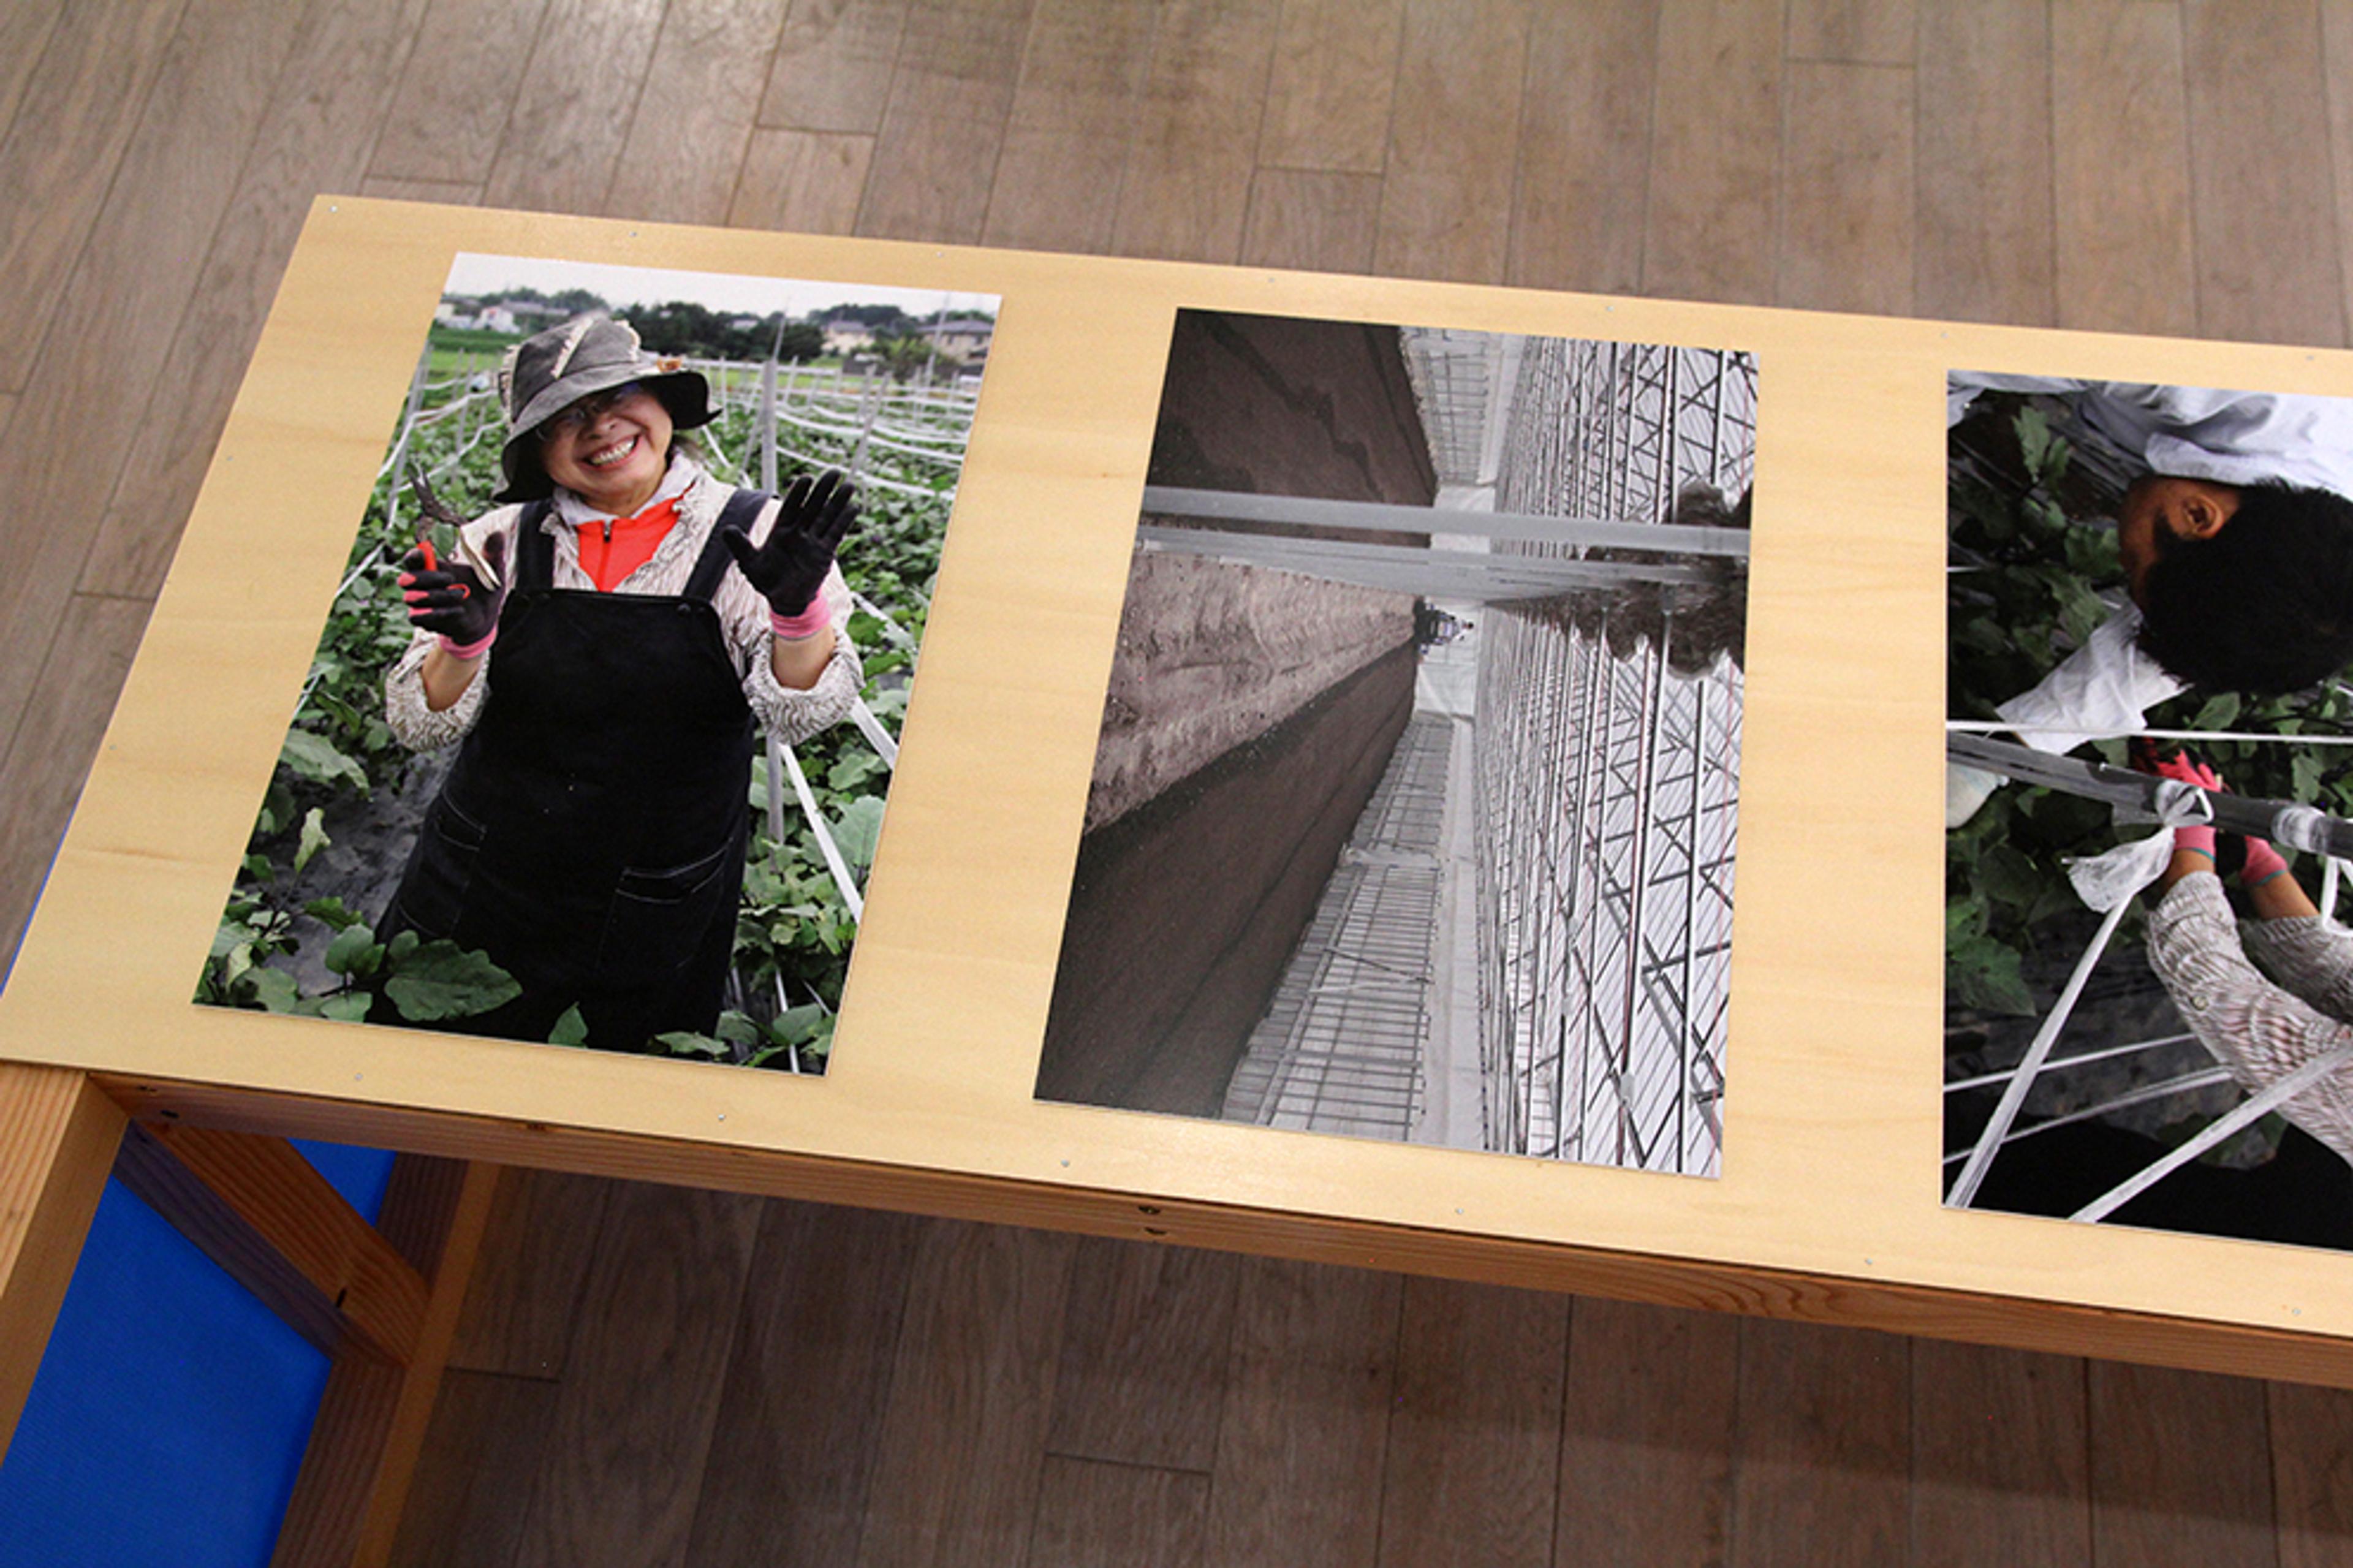 Three colour photographs are put on a table, one is showing a women gardener in a field.